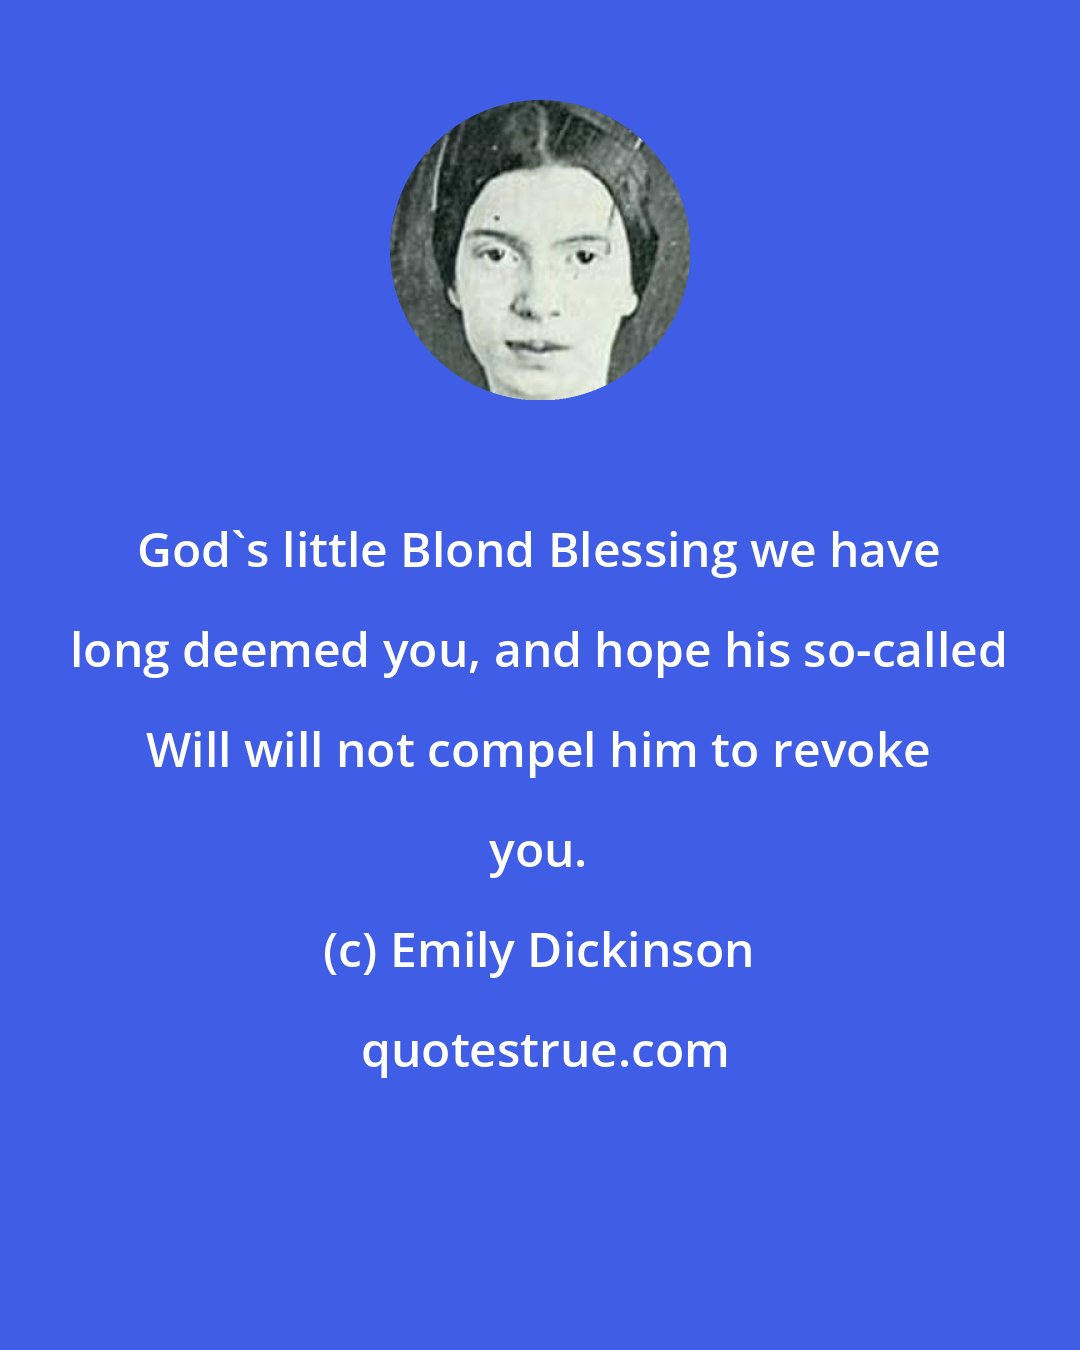 Emily Dickinson: God's little Blond Blessing we have long deemed you, and hope his so-called Will will not compel him to revoke you.